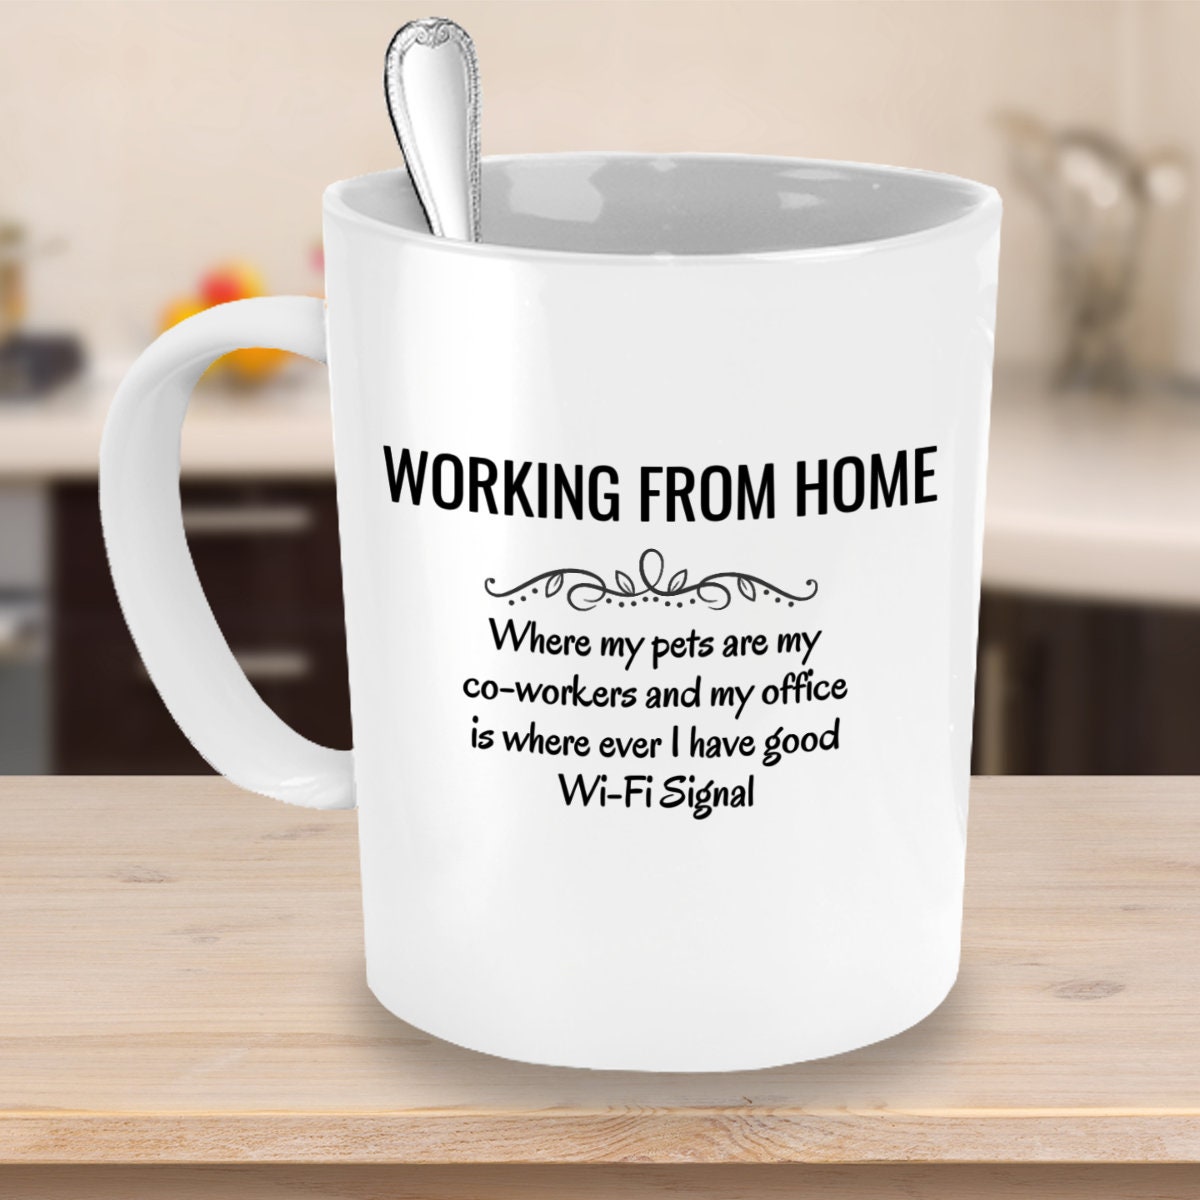 Gift Guide for People Who Work From Home — Coffee With Keri